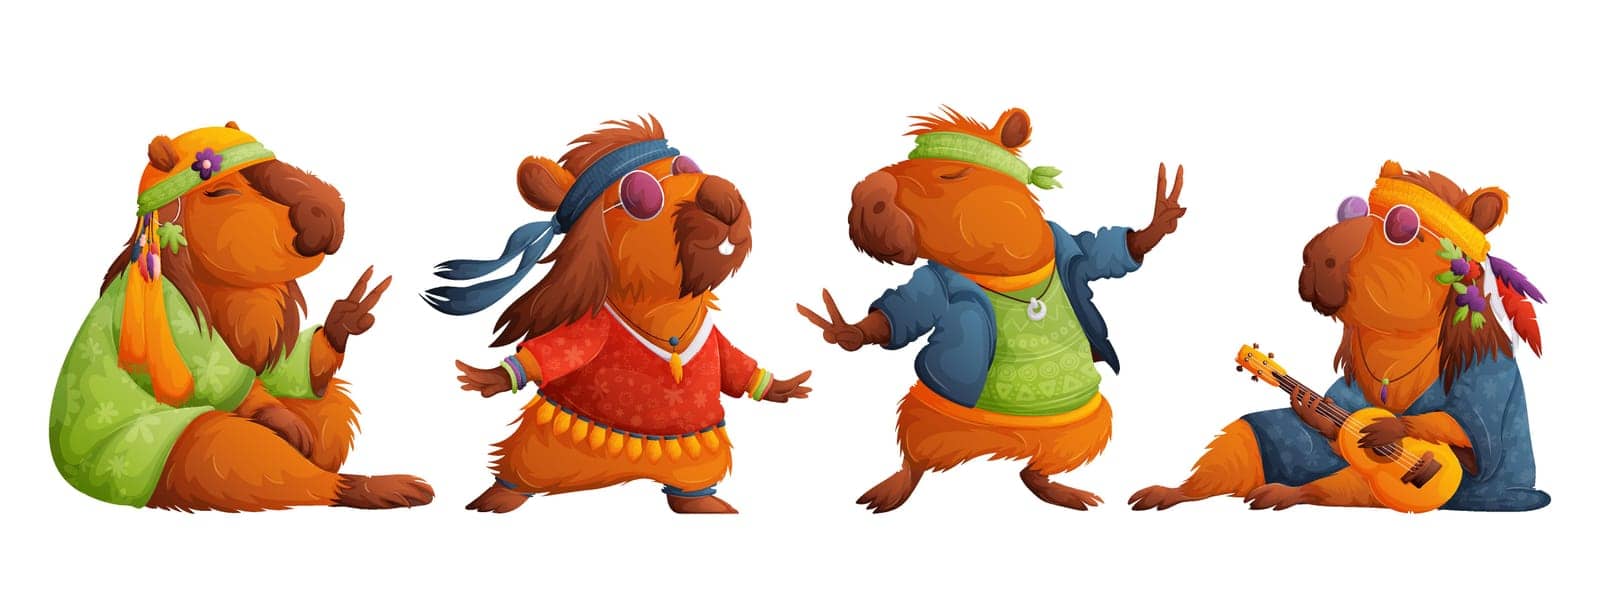 Set of peaceful hippie capybaras. Calm capybara in bright hippie clothes and pink glasses, relaxes, meditates and plays a small ukulele guitar. Cartoon style, vector illustration. by Javvani